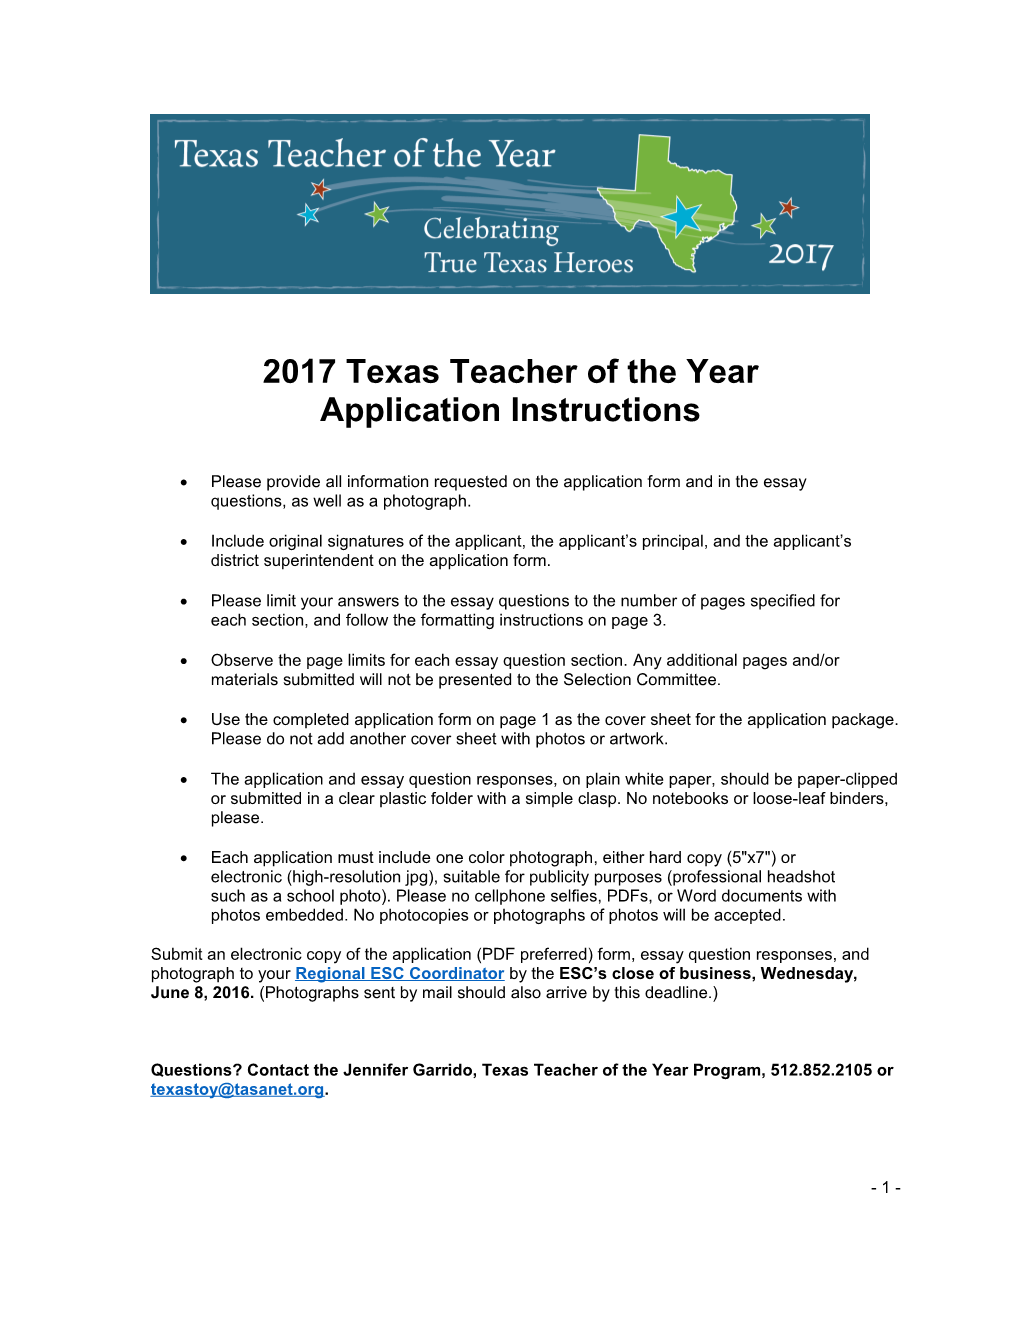 2017 Texas Teacher of the Year Application Instructions